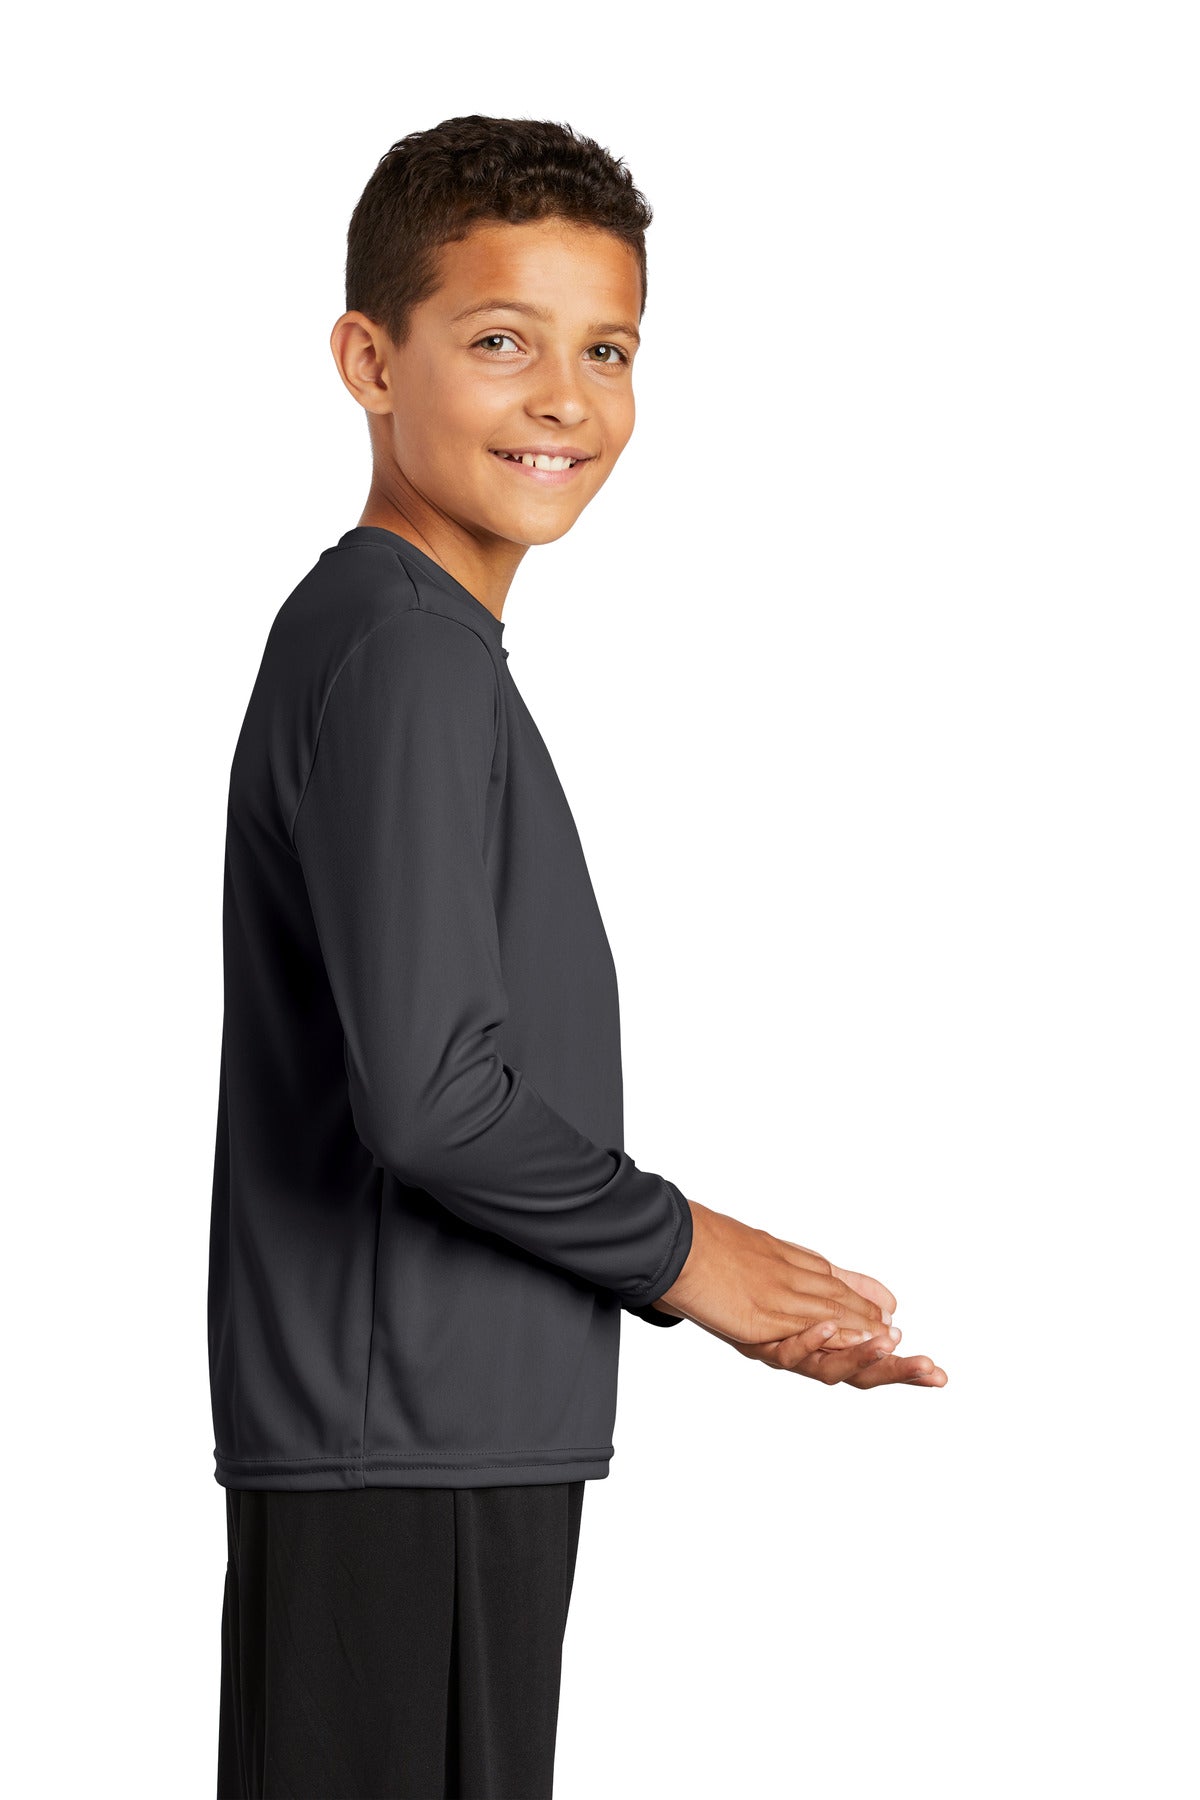 Sport-Tek Youth Long Sleeve PosiCharge Competitor Tee. YST350LS - BT Imprintables Shirts